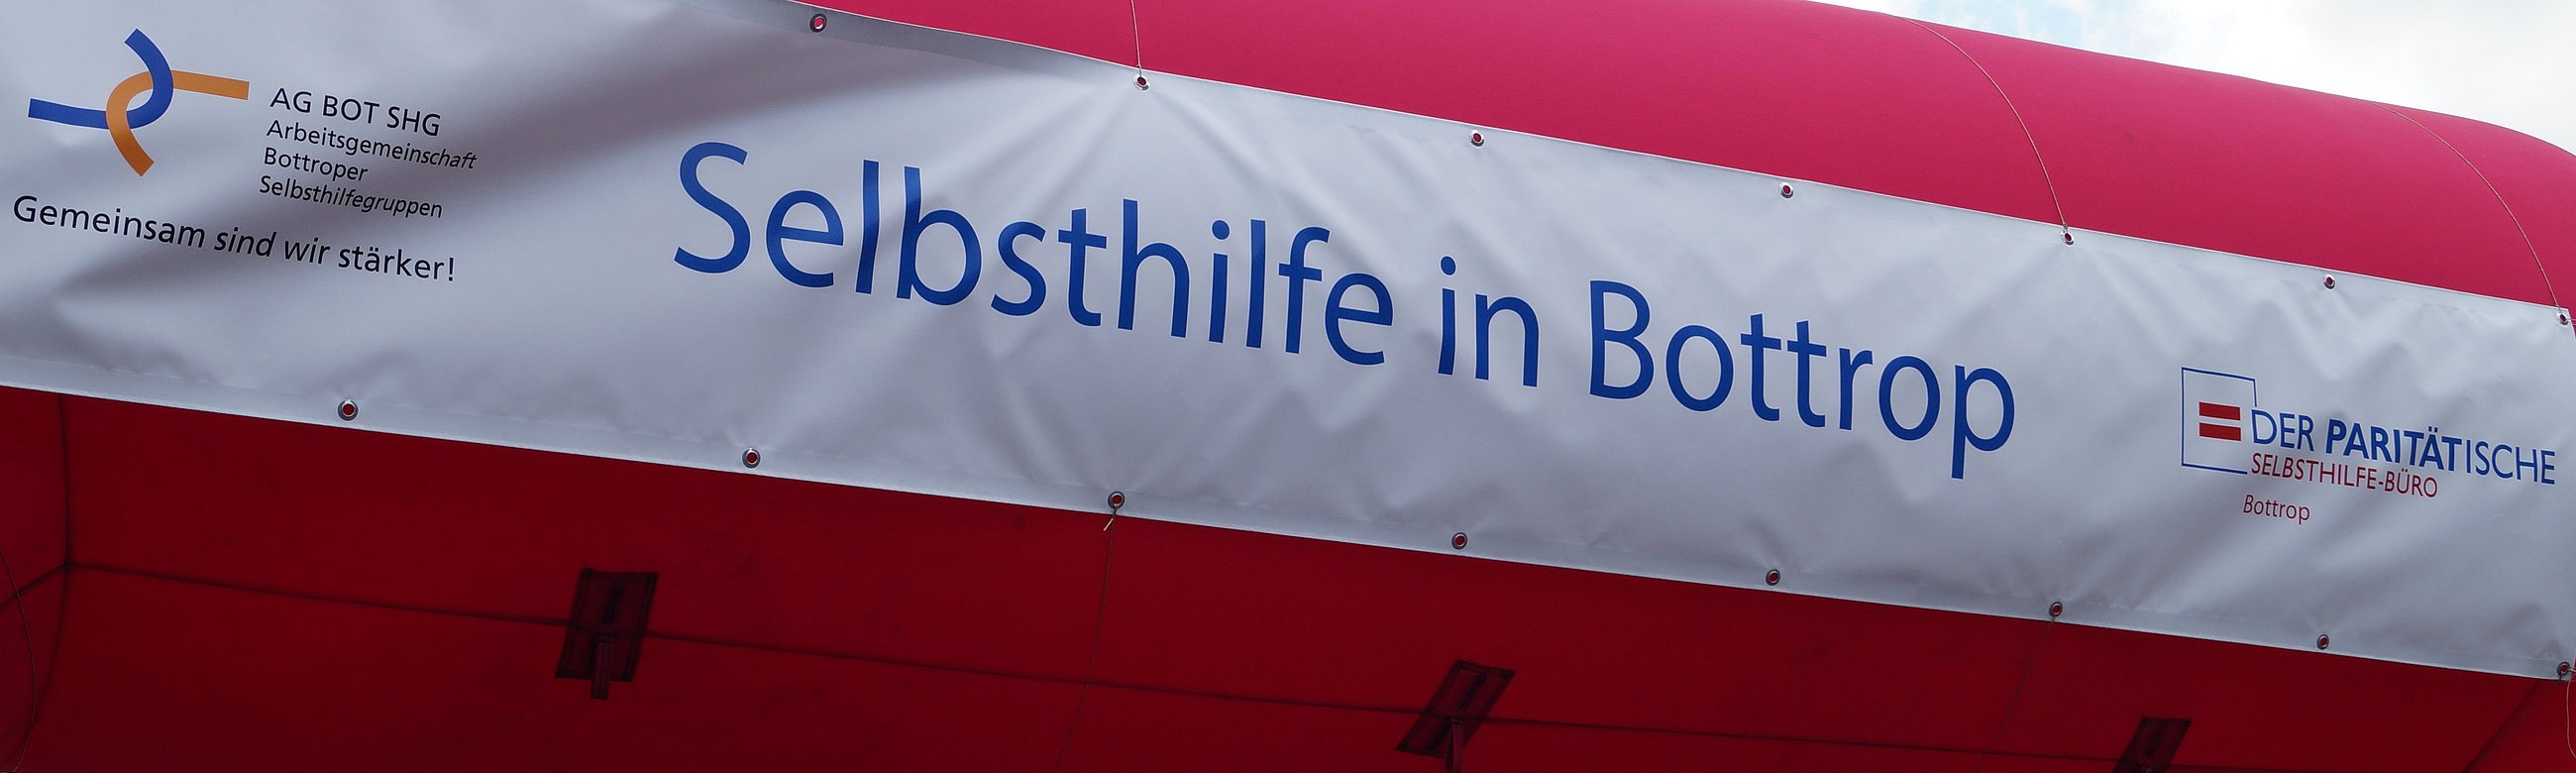 Banner Selbsthilfe in Bottrop